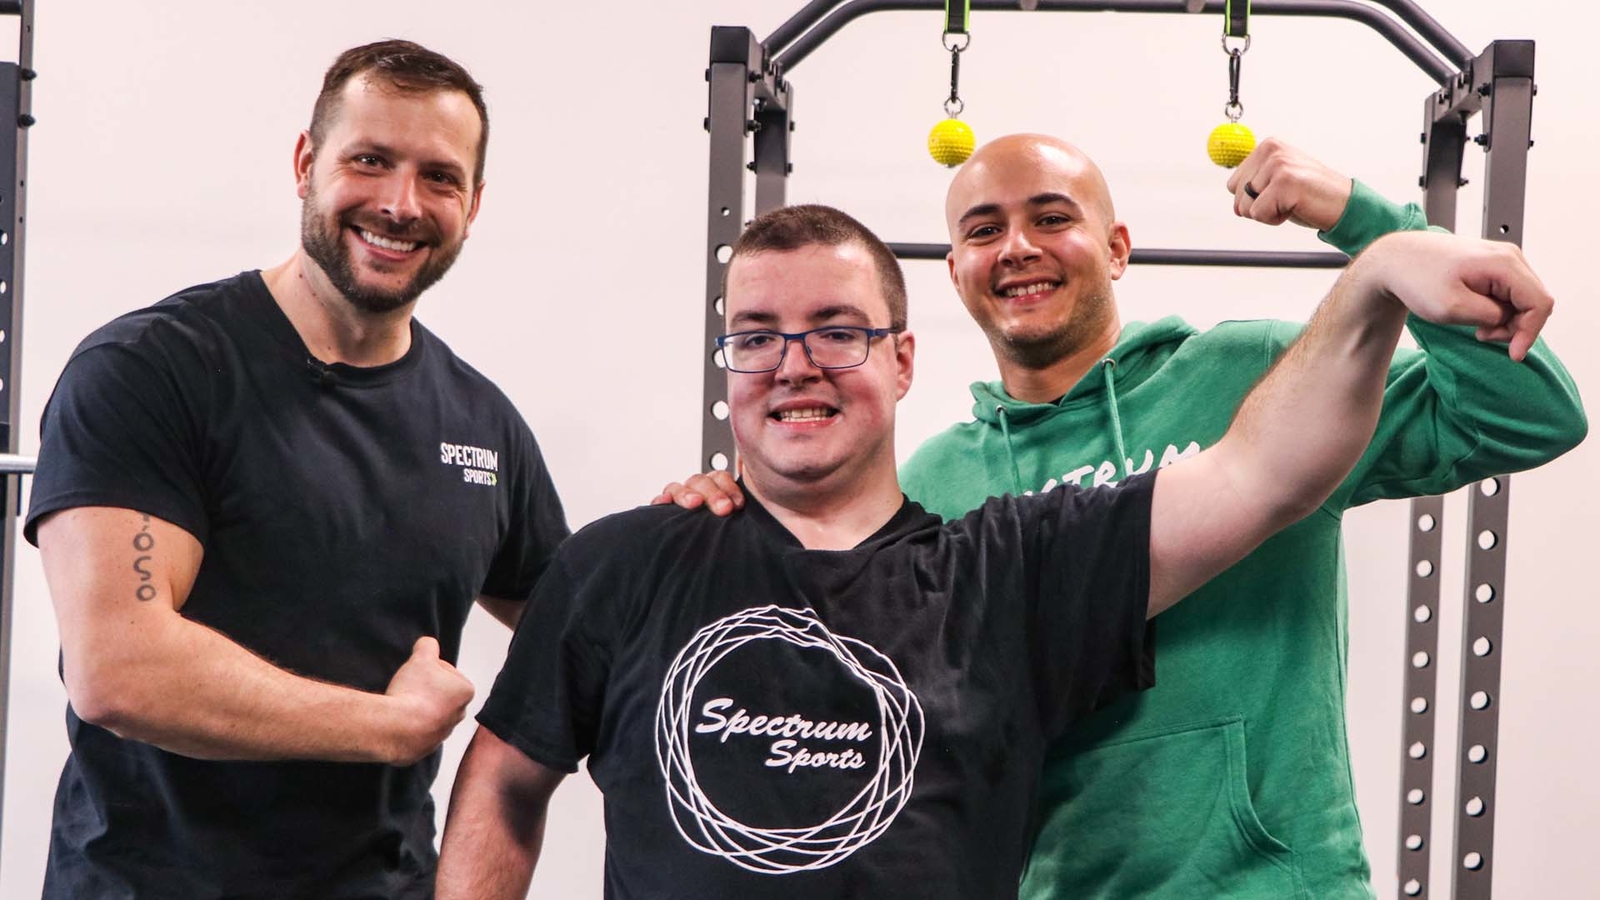 ‘Spectrum Sports’ opens gym for athletes of all abilities in Deptford, New Jersey [Video]